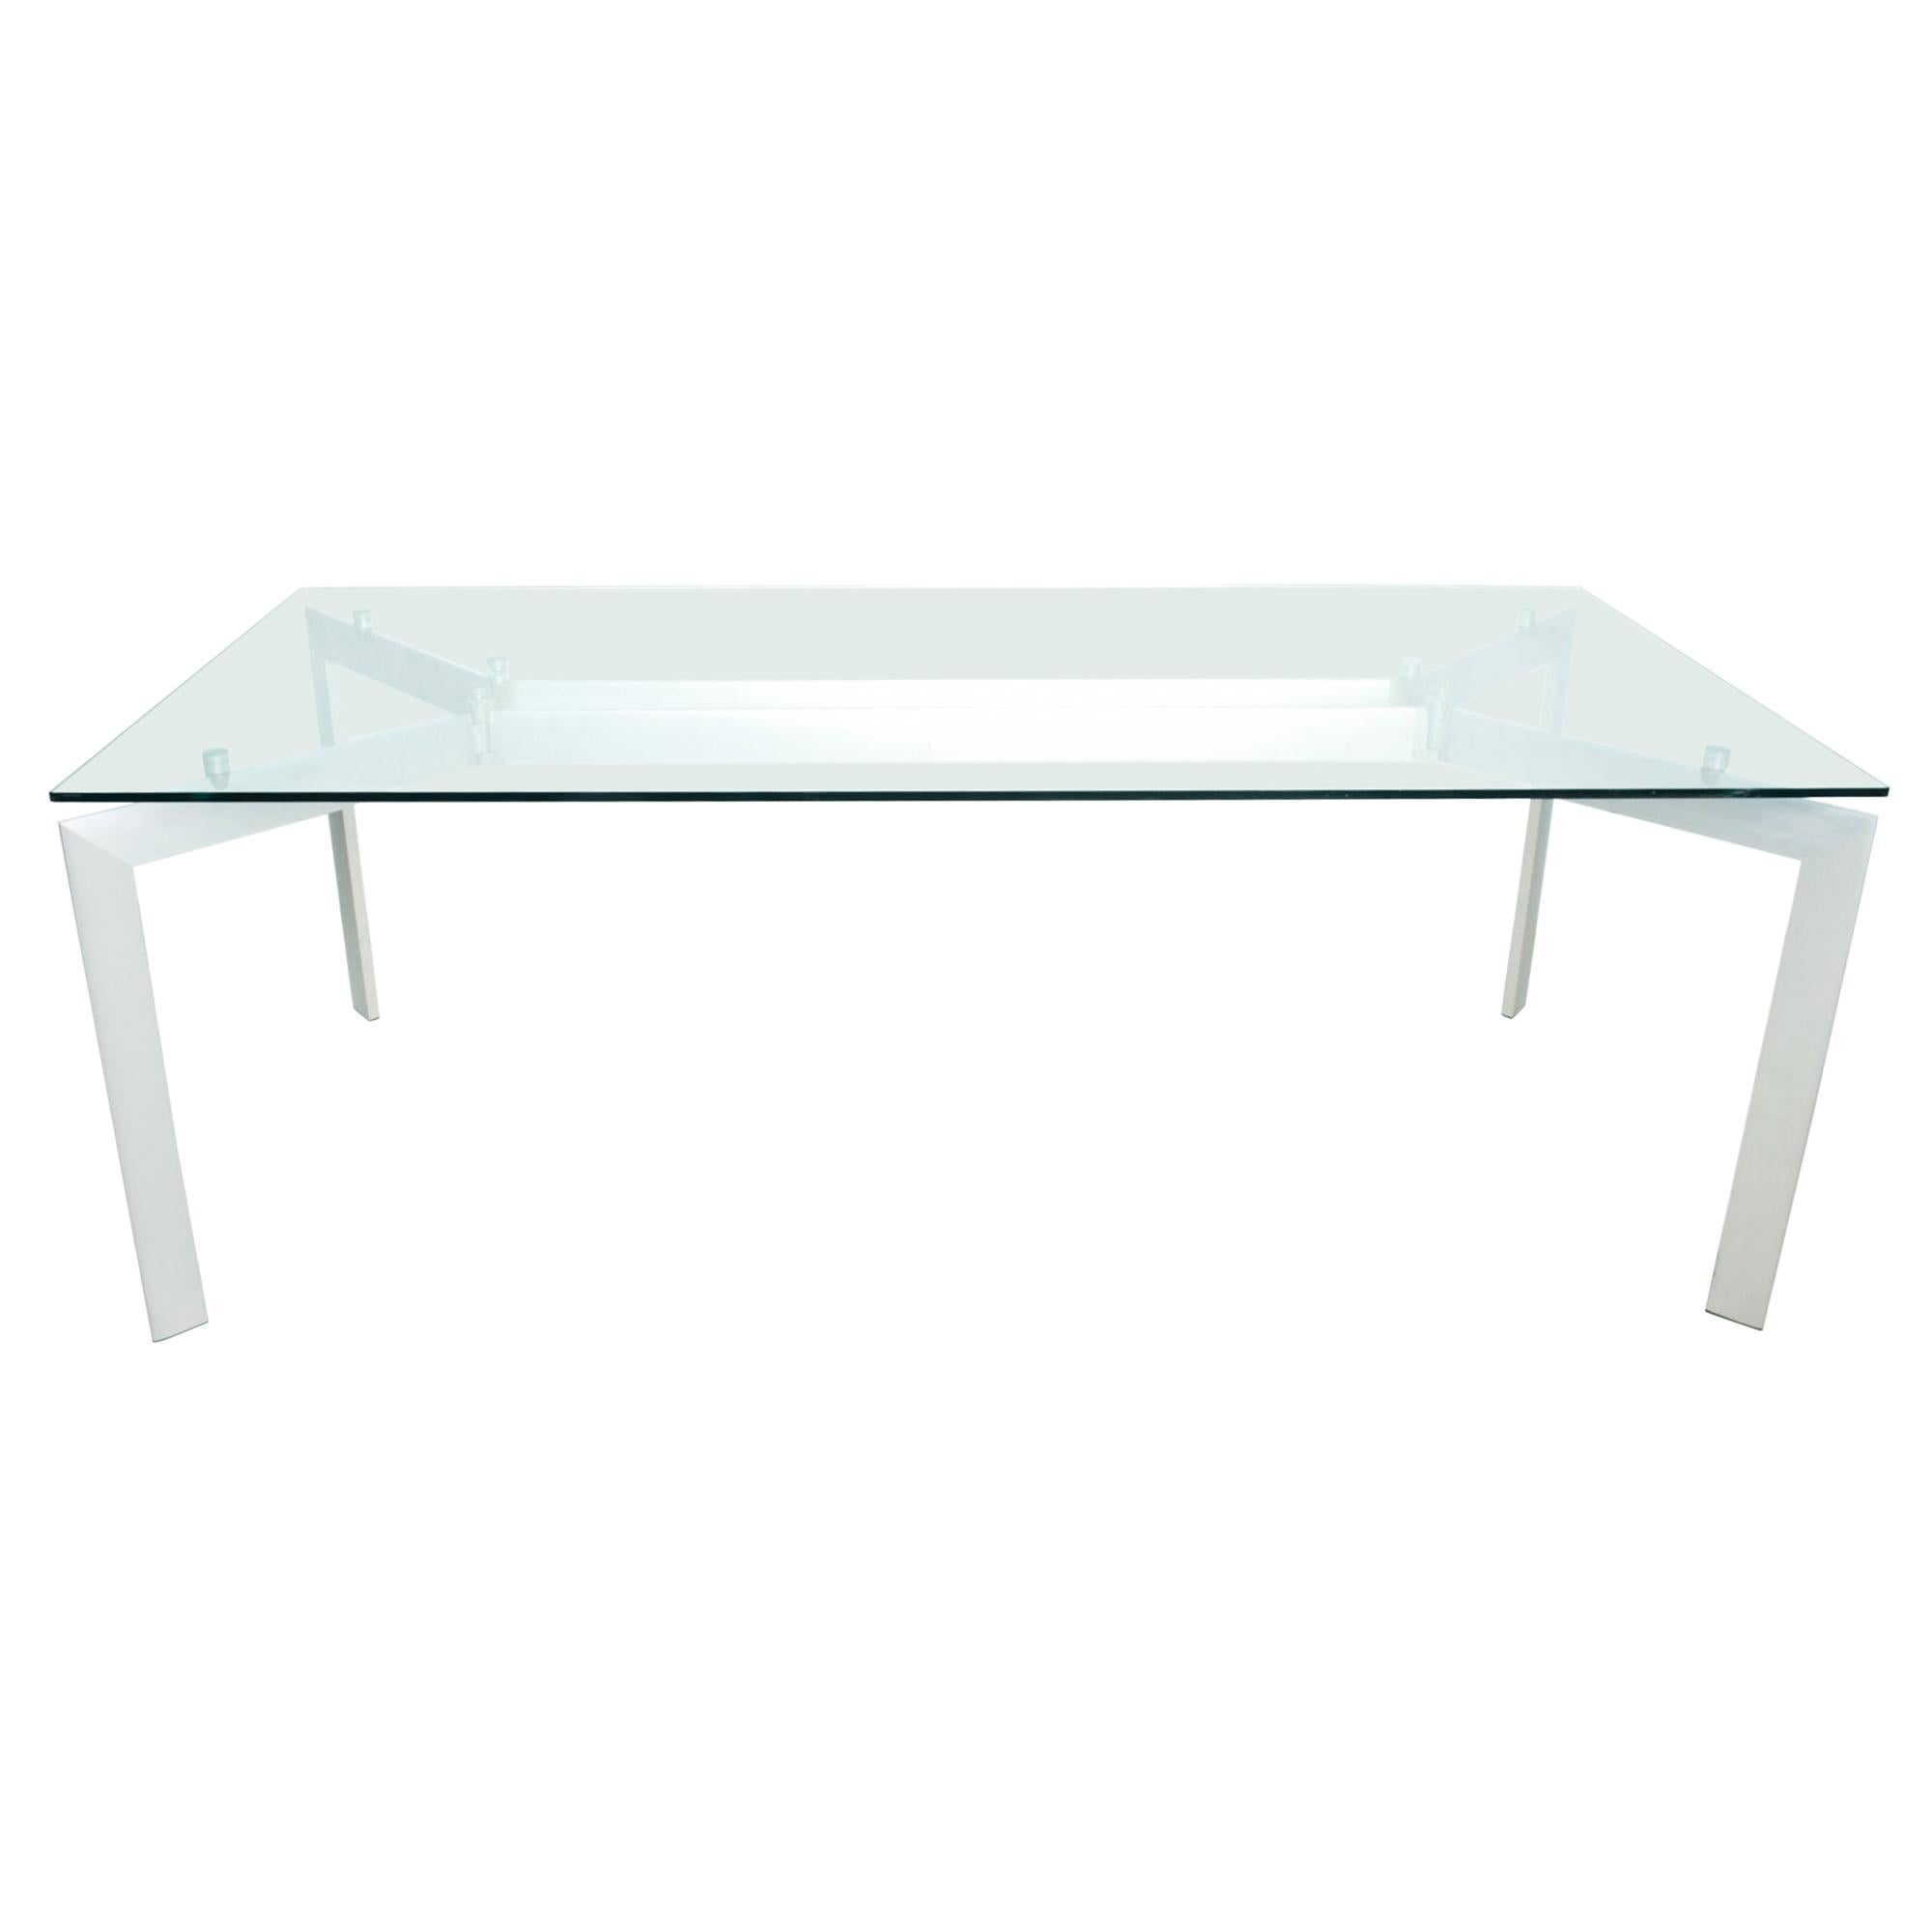 1990s Floating Glass Metal Metra Dining Table Makio Hasuike for Seccose Italy